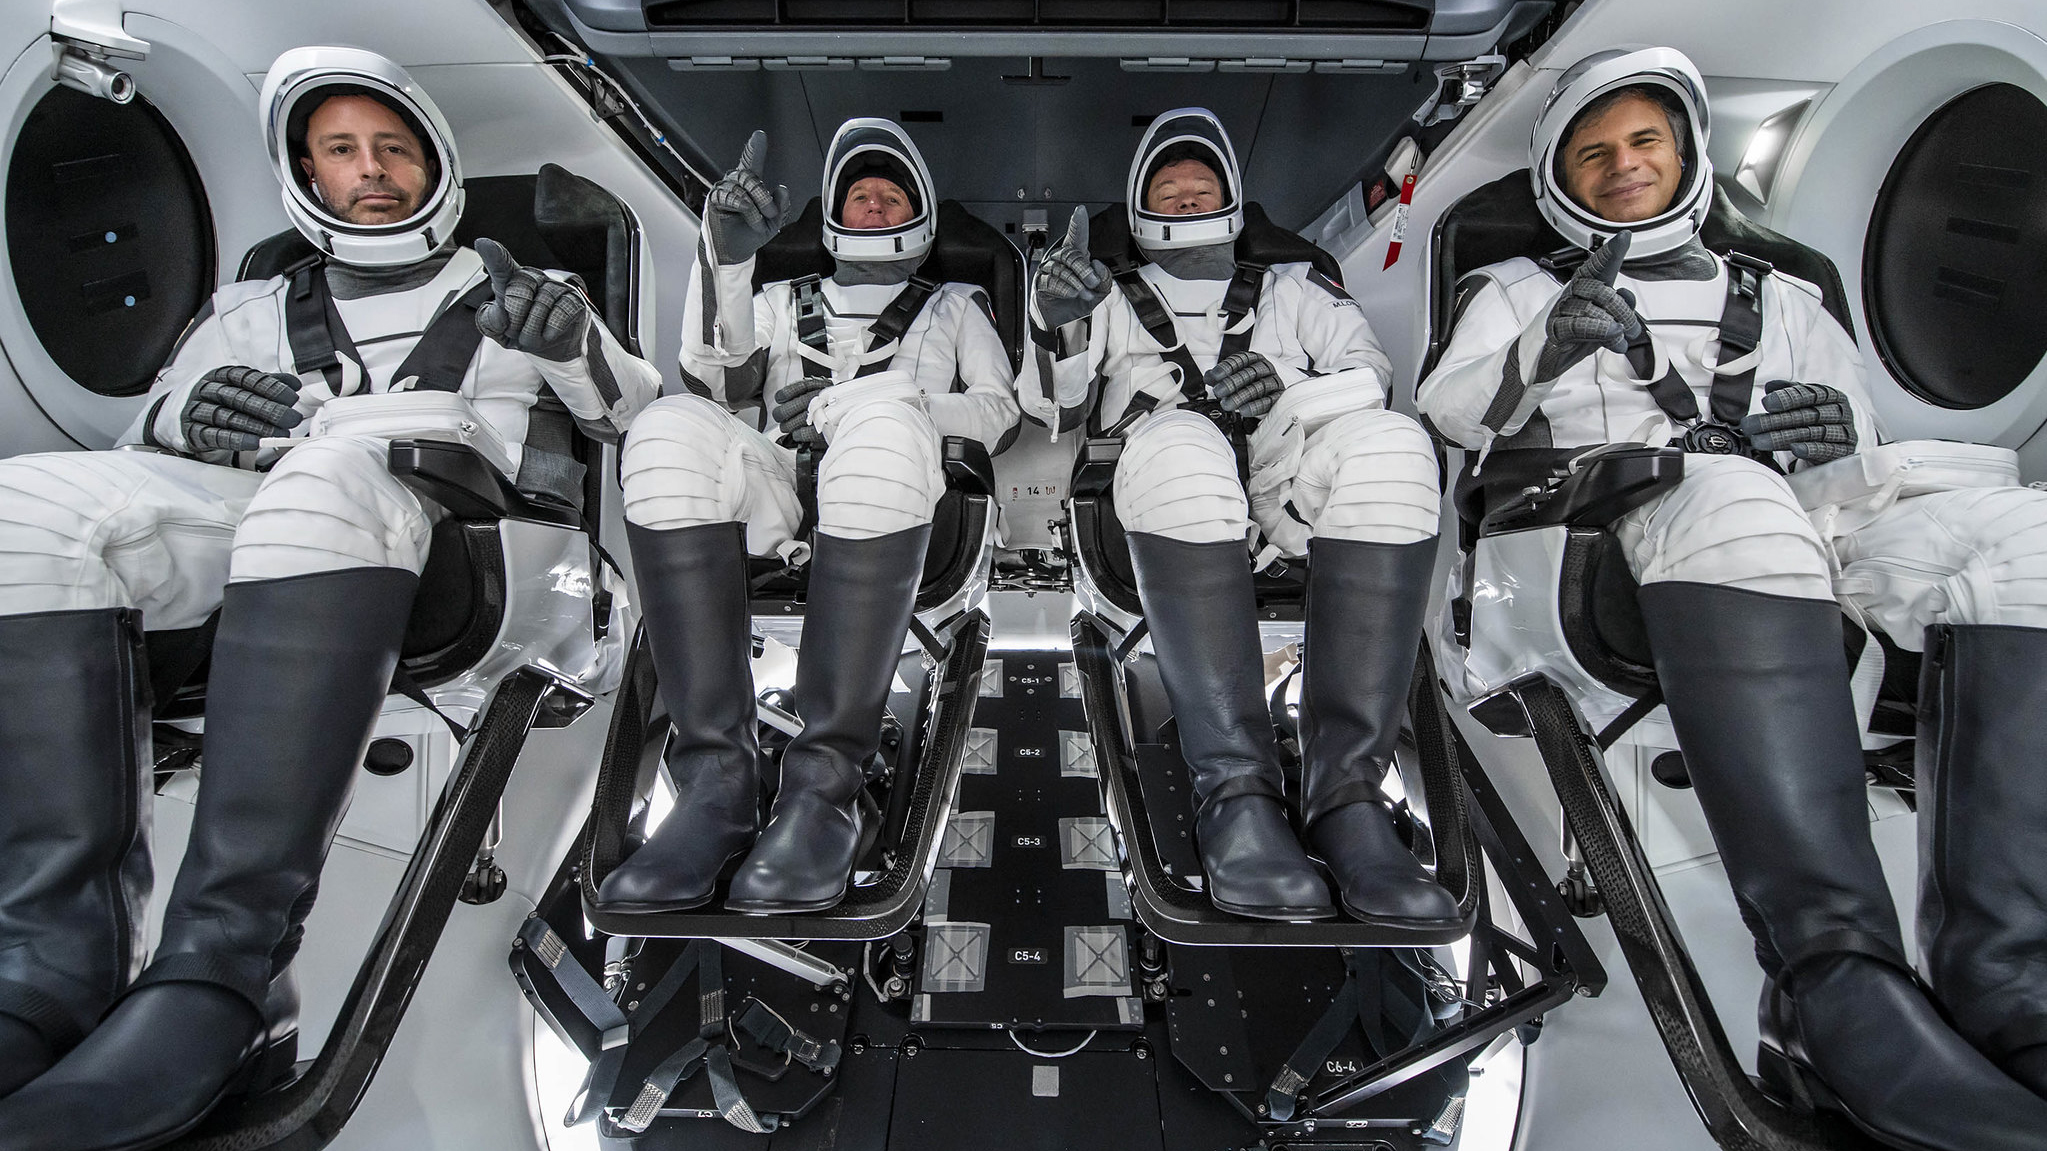 The pilots of Axiom Space’s Ax-1 plan to photograph inside a SpaceX Crew Dragon spacecraft during training.  They are: (from left) Mark Pathy;  Larry Connor;  Michael López-Alegría;  and Eytan Stibbe.